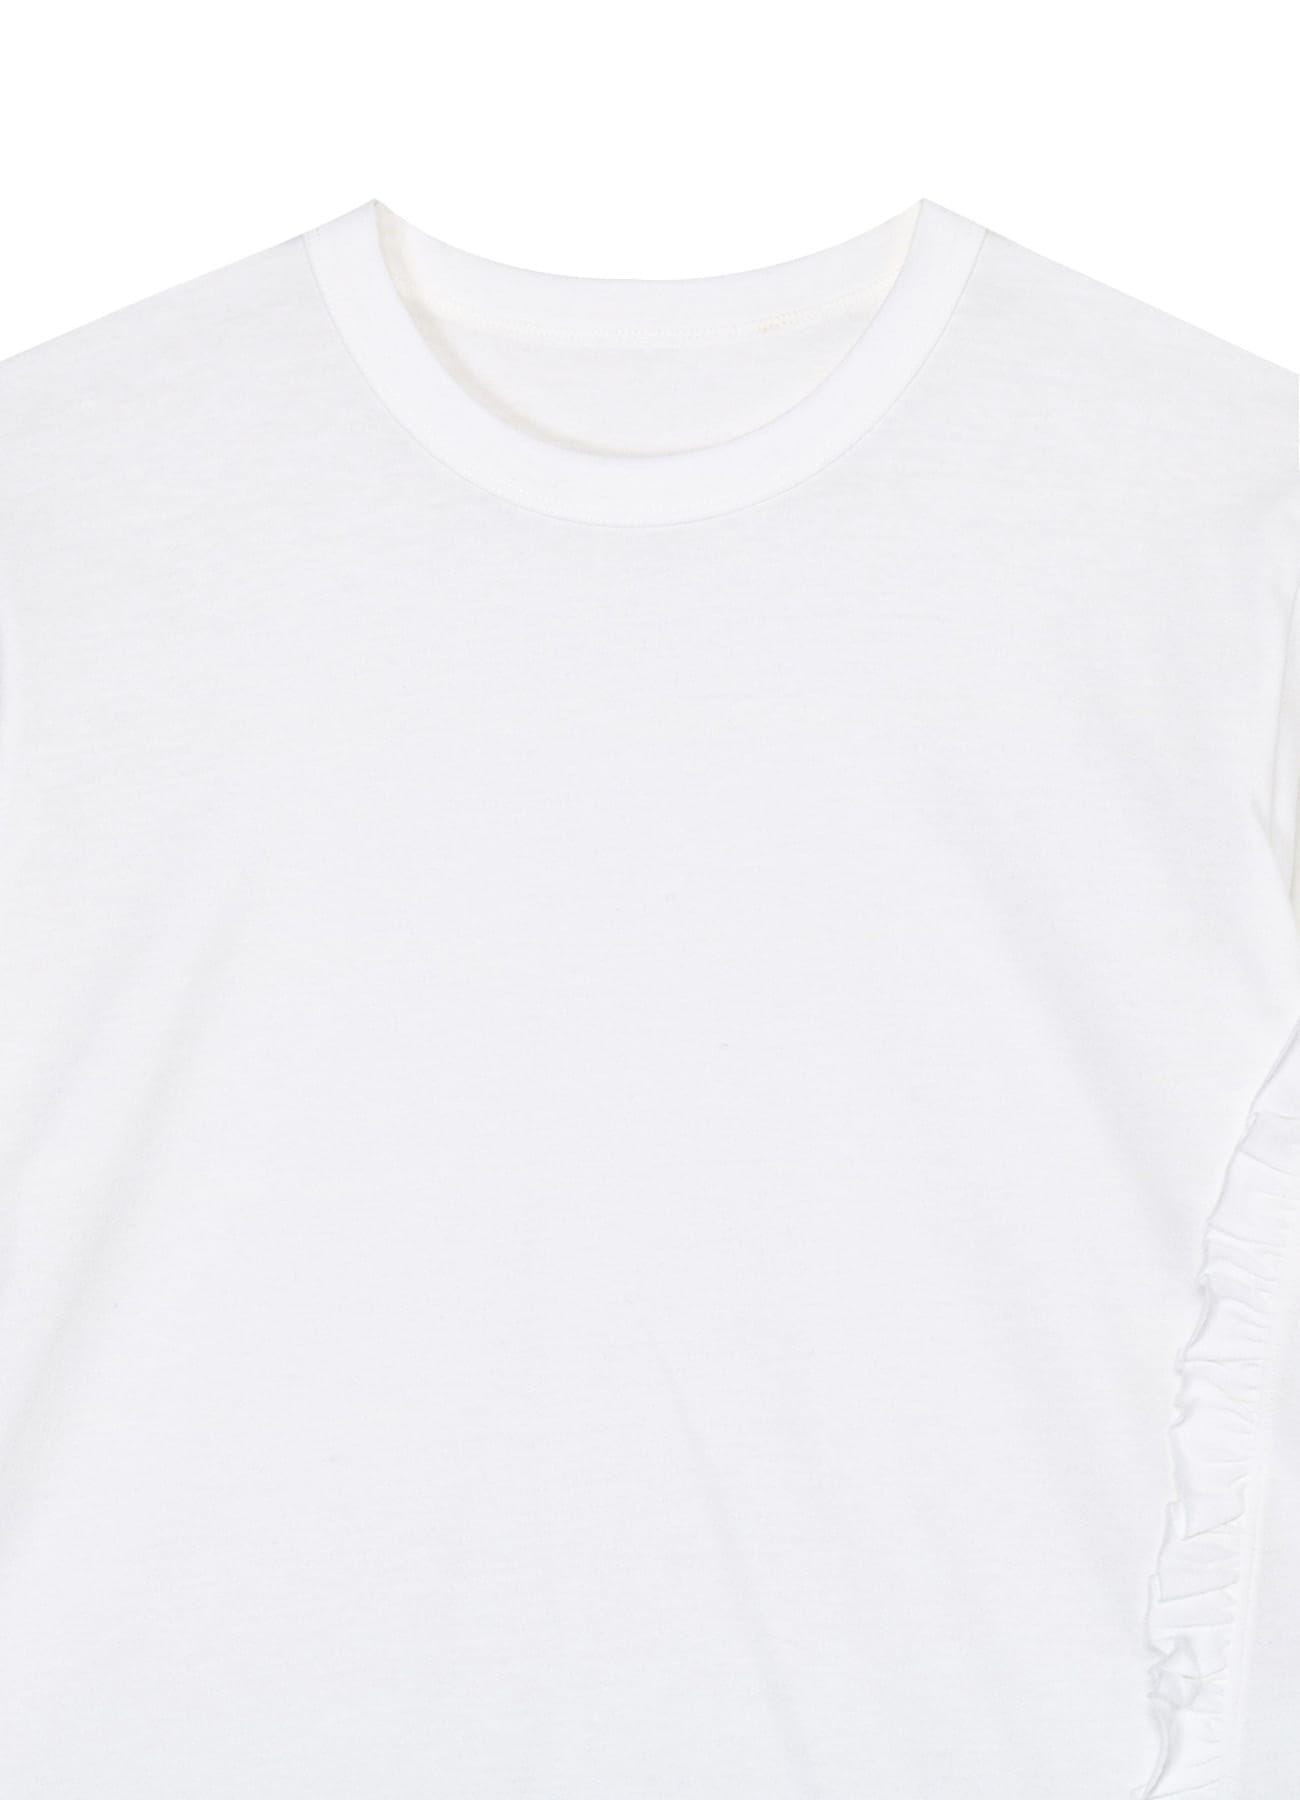 COTTON JERSEY FRILL T-SHIRTS(FREE SIZE White): Y's for living｜THE 